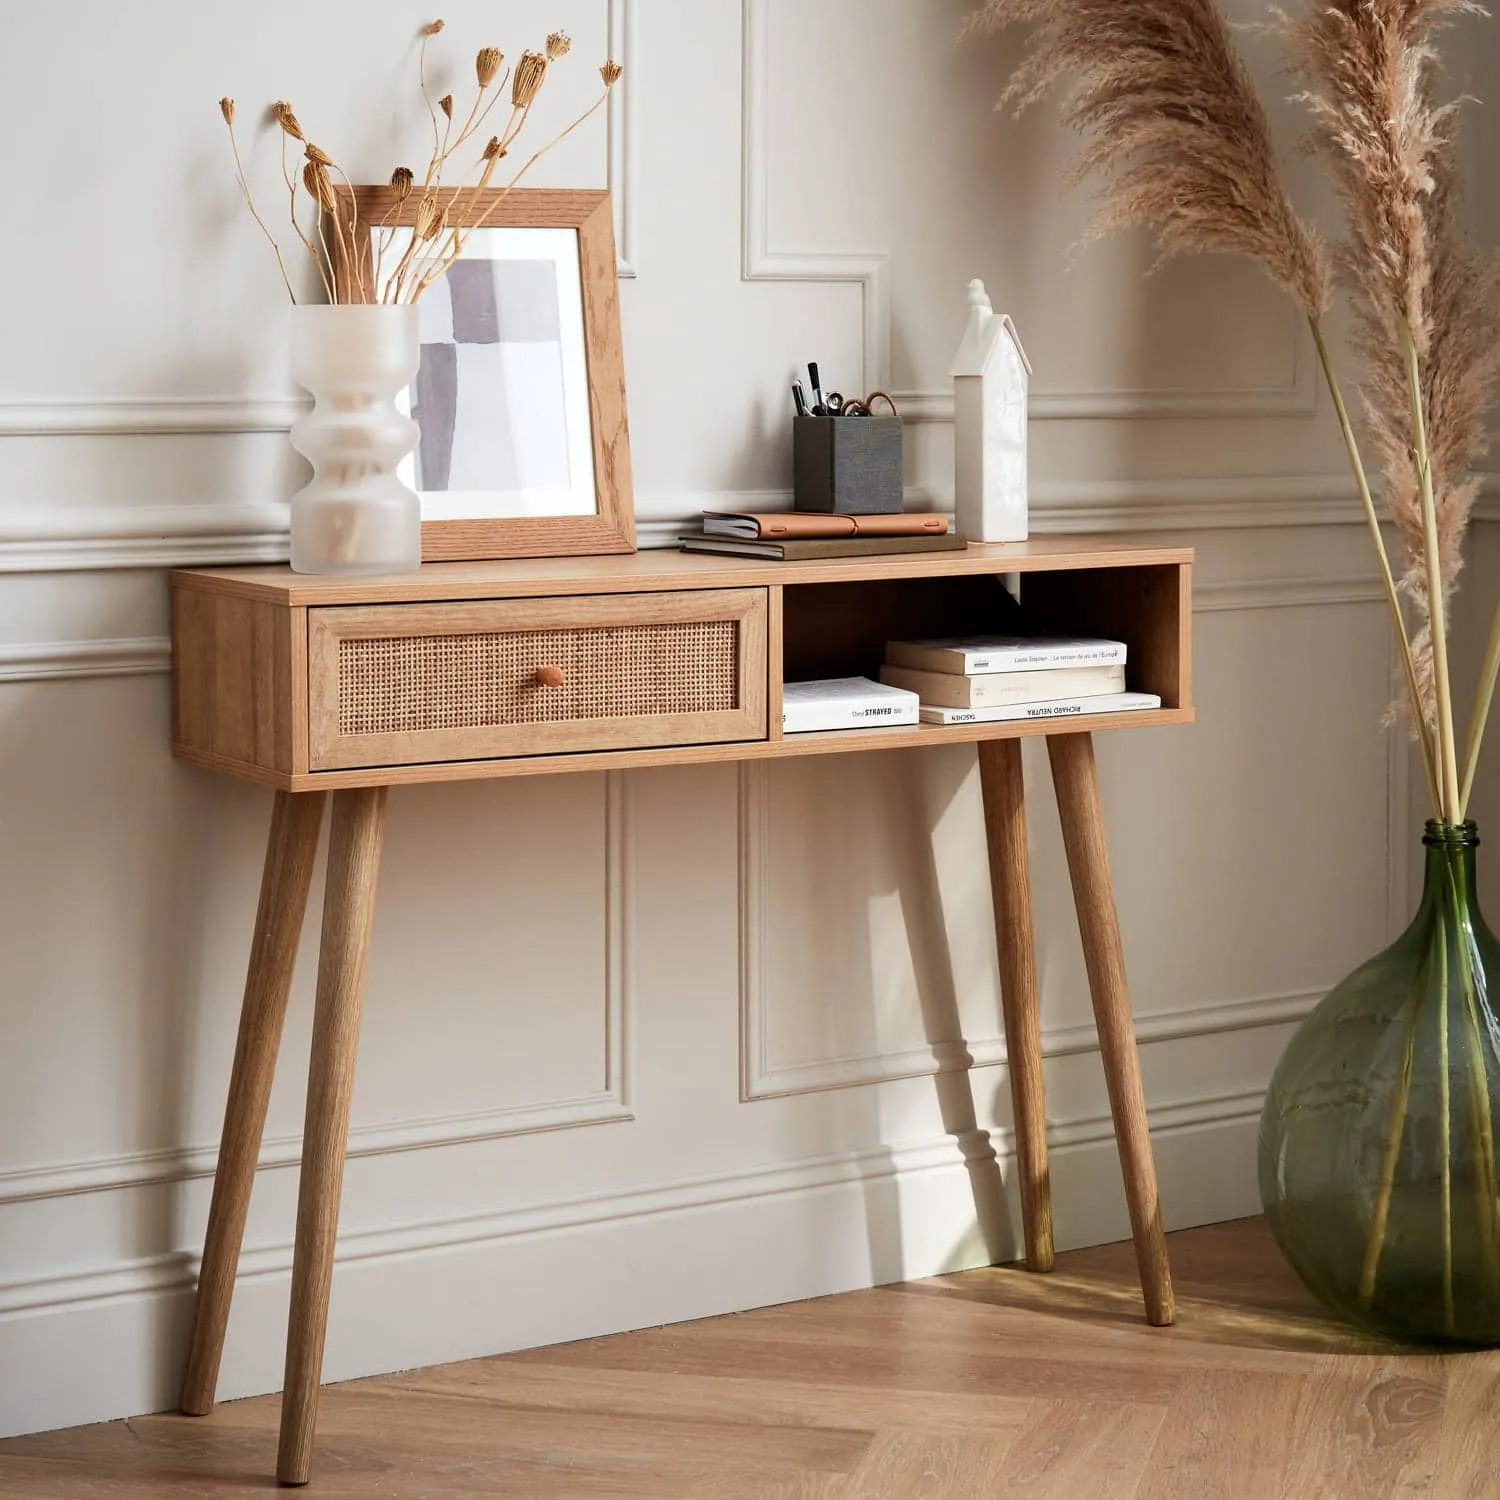 rattan sideboard, placed in living room for storage, has two drawers, wooden flooring